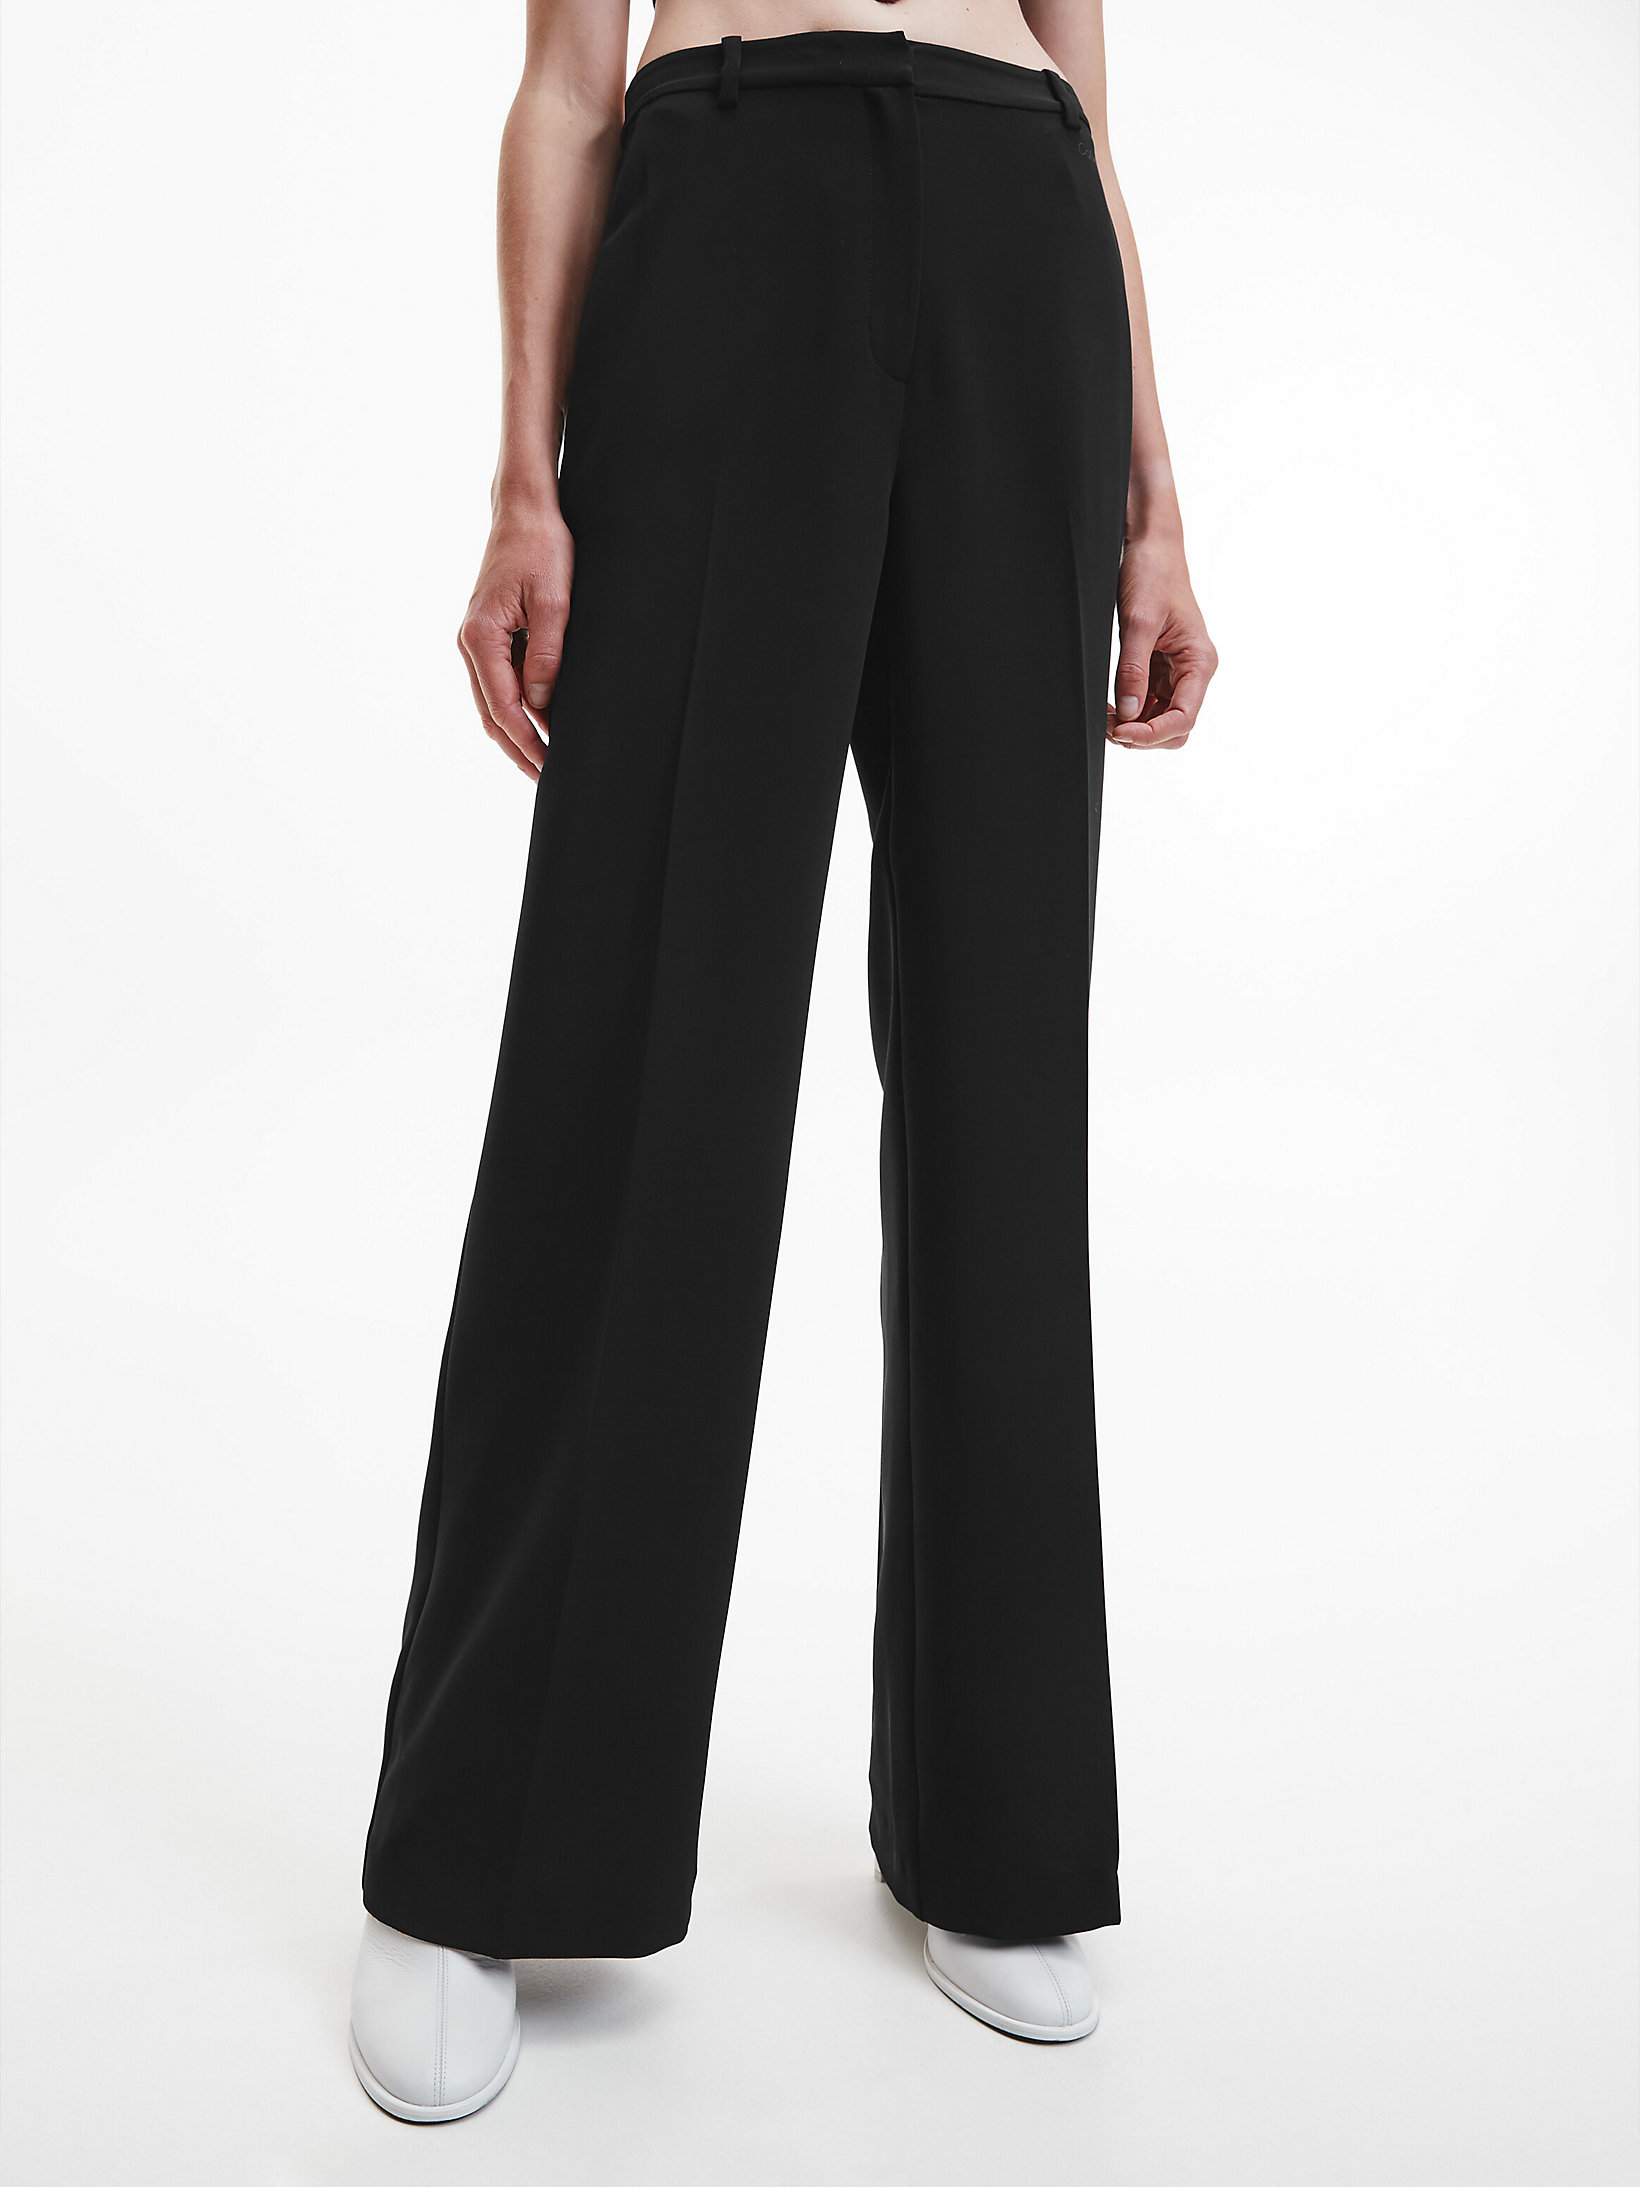 CK Black Woven Stretch Crepe Trousers undefined women Calvin Klein